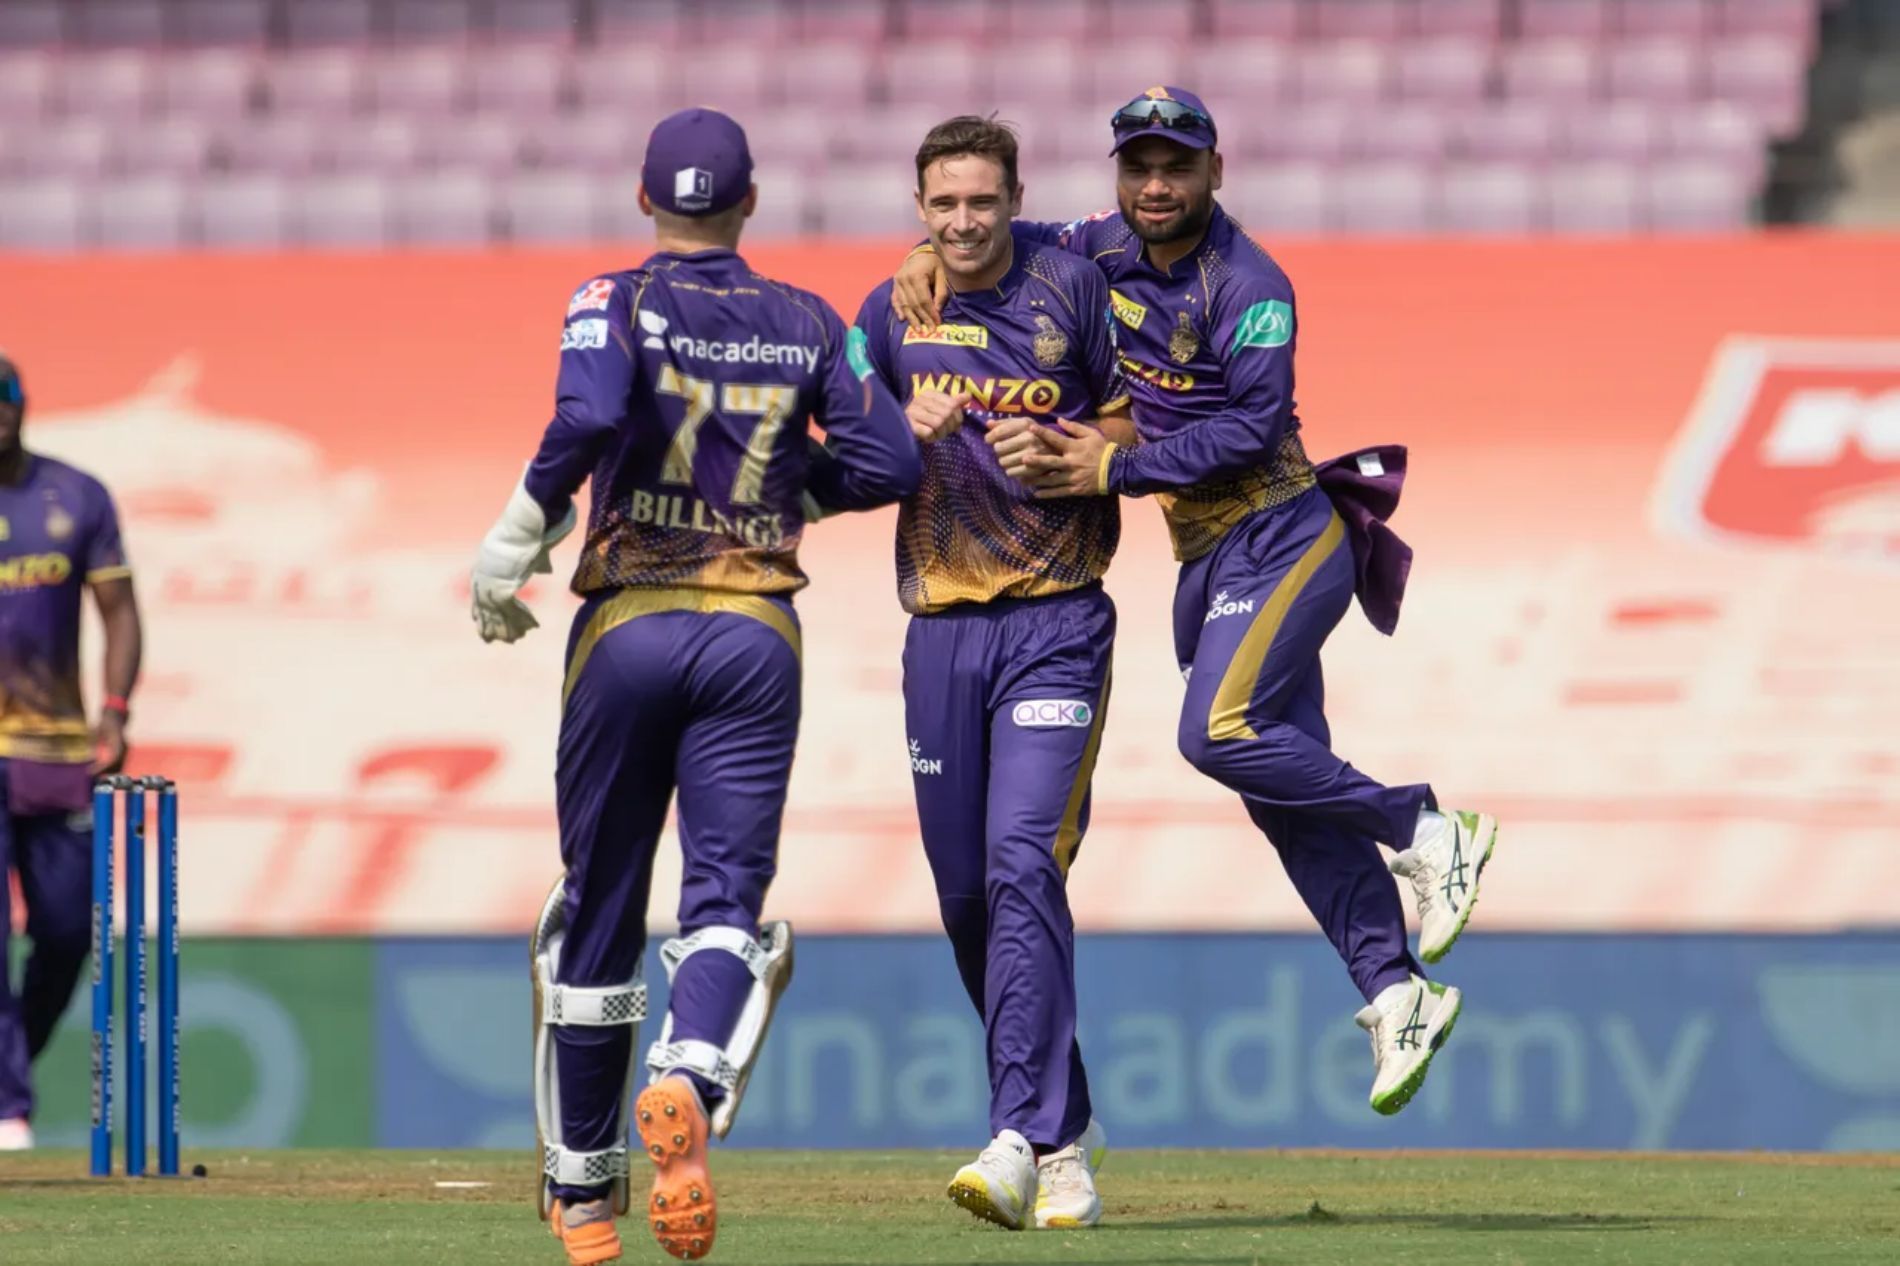 Tim Southee excelled with the ball for KKR. Pic: IPLT20.COM